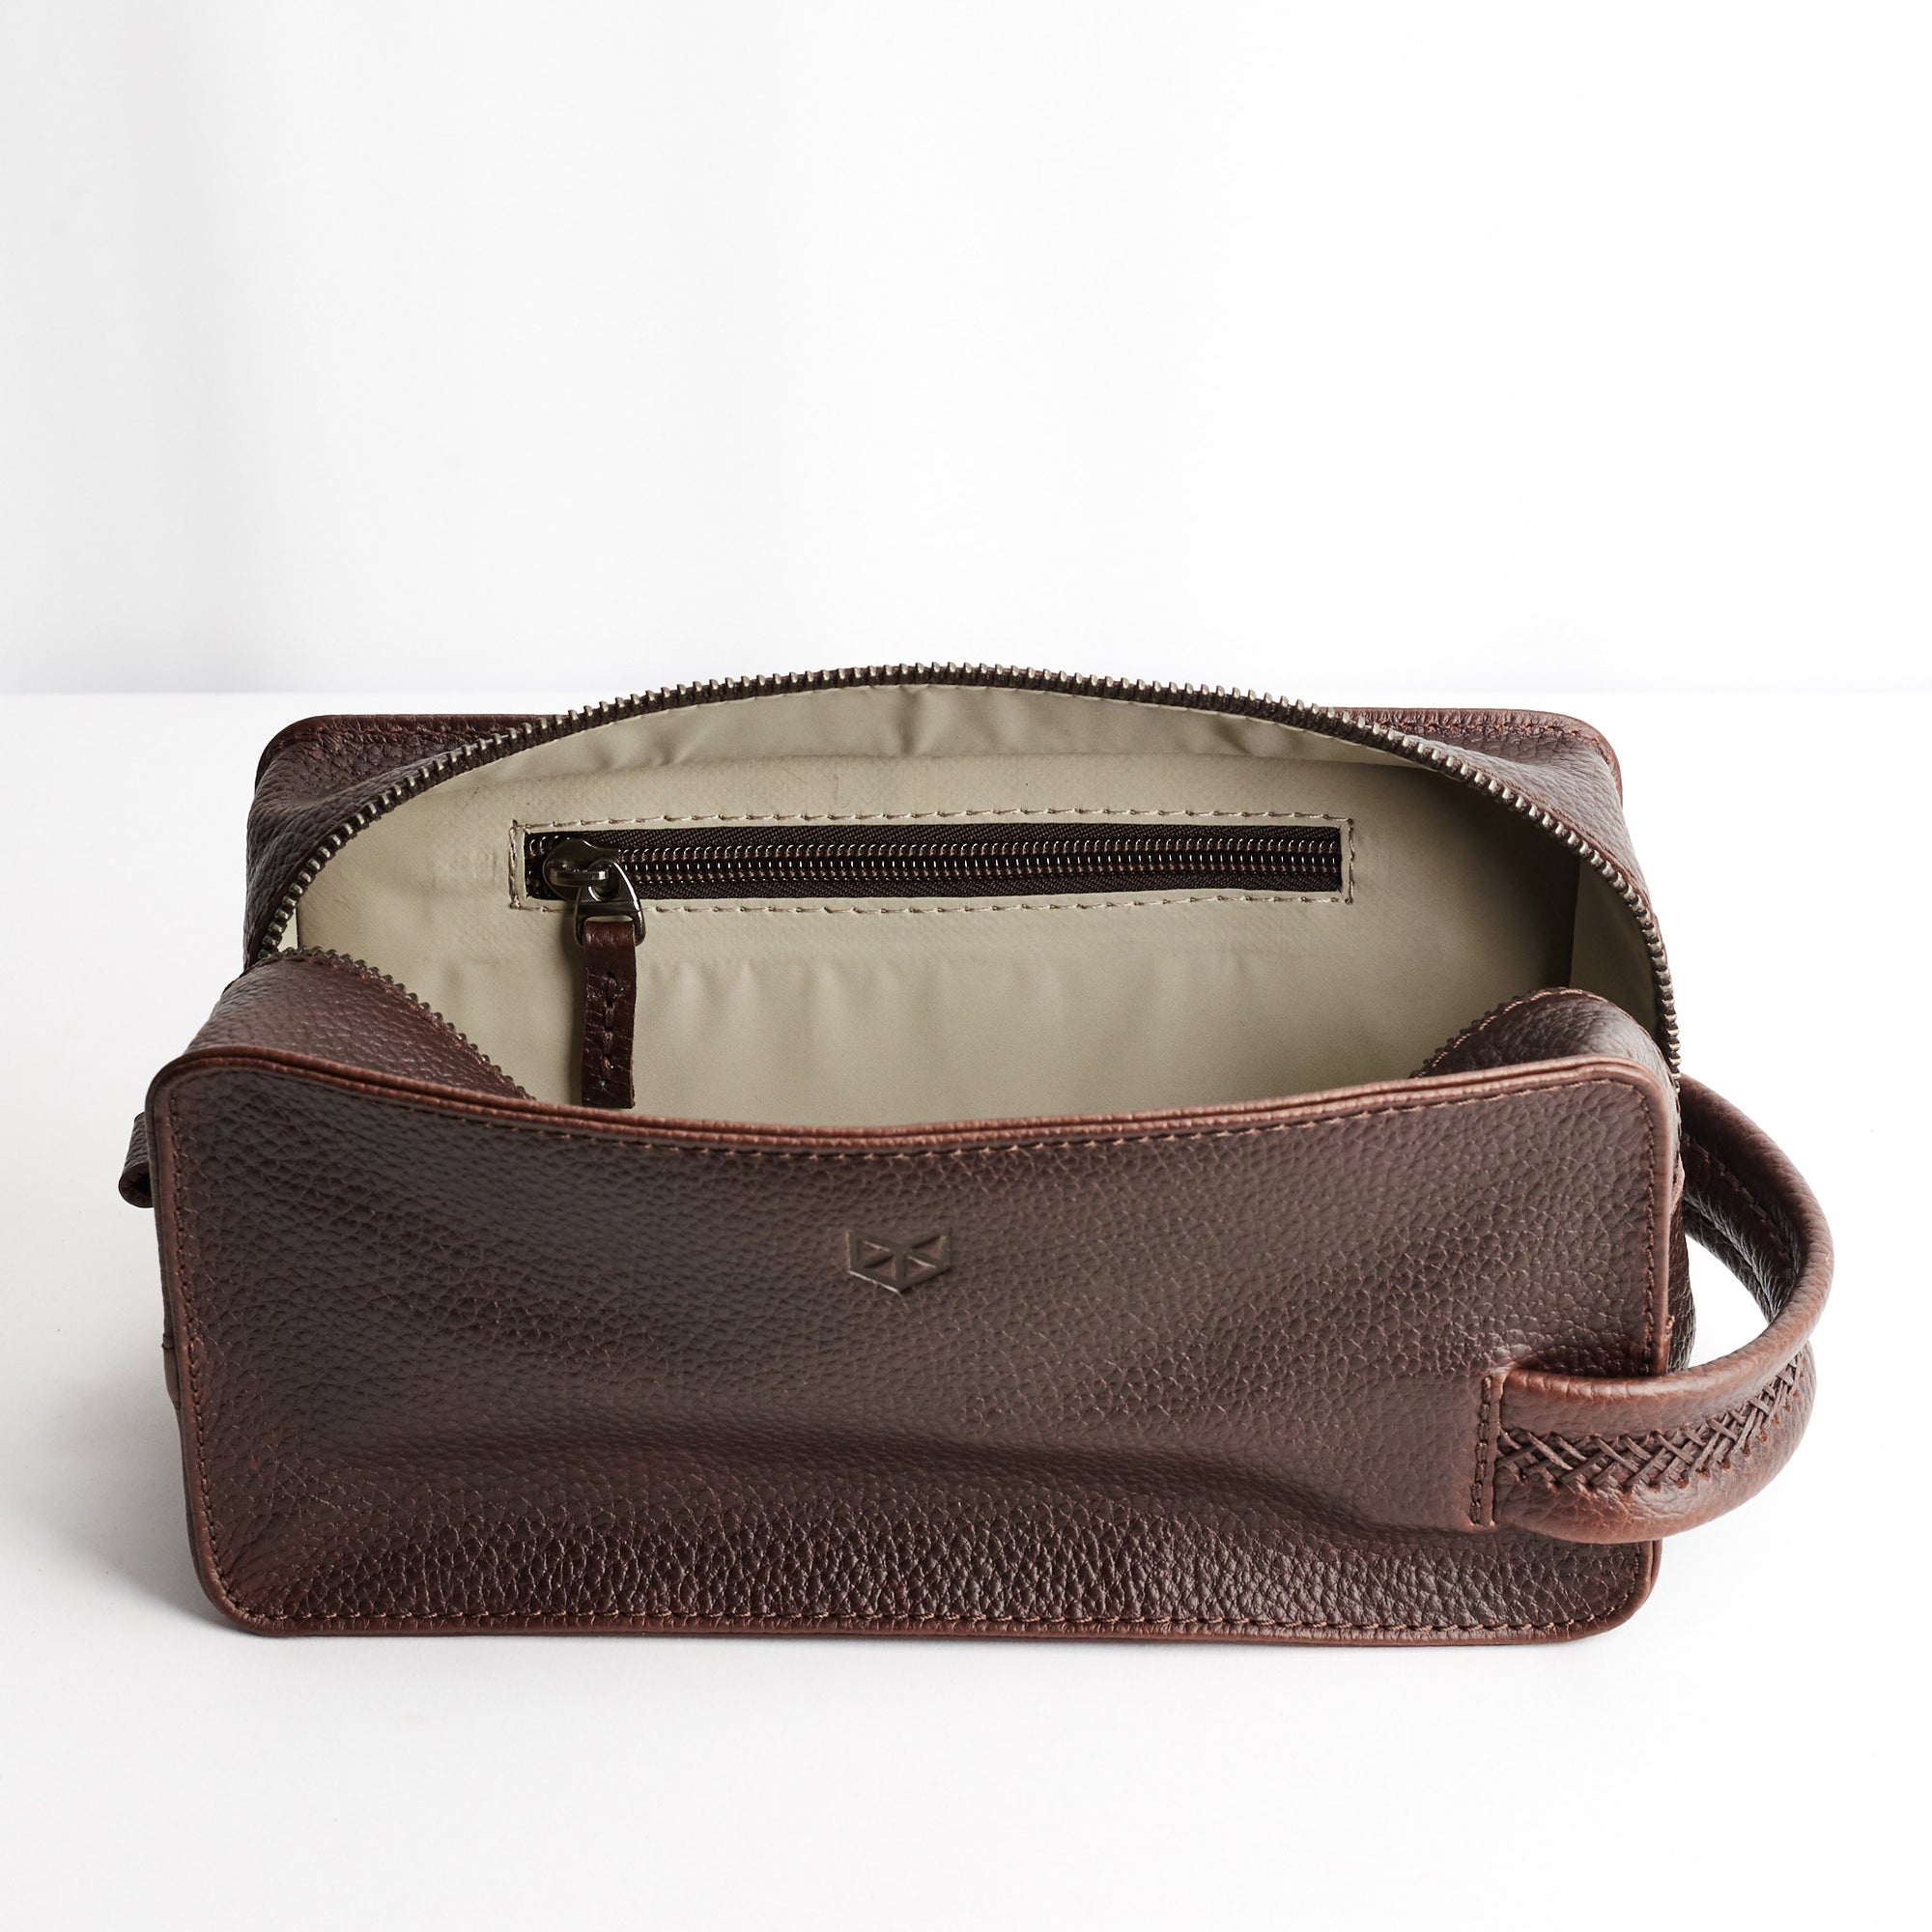 Interior Pocket. Dark Brown leather toiletry, shaving bag with hand stitched handle. Groomsmen gifts